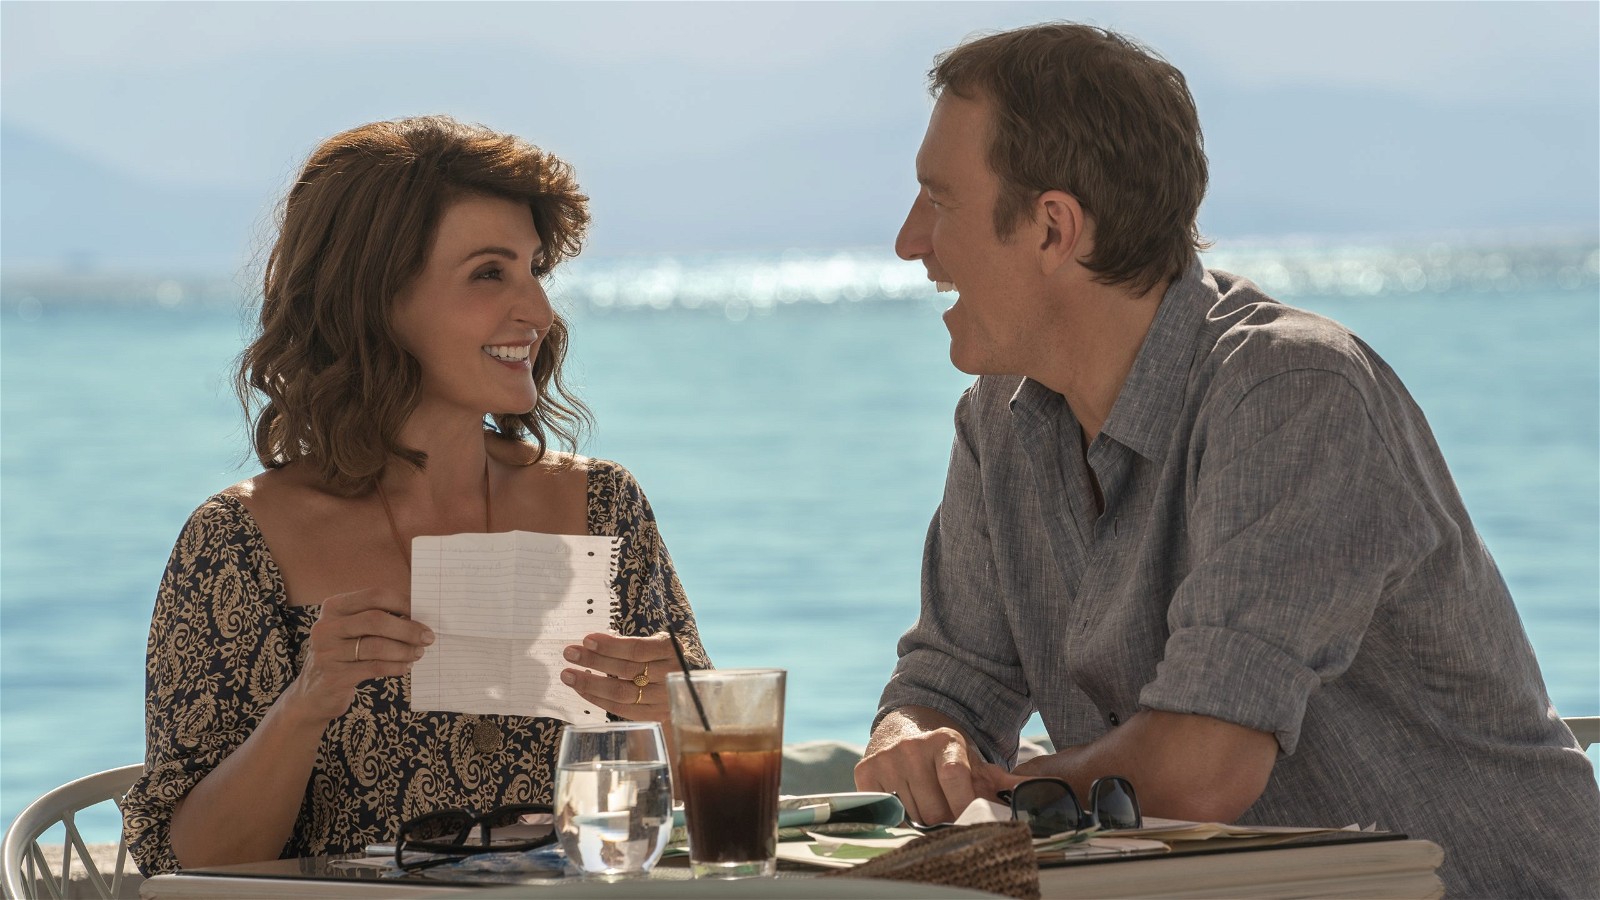 (L to R) Nia Vardalos stars as "Toula" and John Corbett stars as "Ian" in writer/director Nia Vardalos' MY BIG FAT GREEK WEDDING 3, a Focus Features release. Courtesy of Yannis Drakoulidis / Focus Features